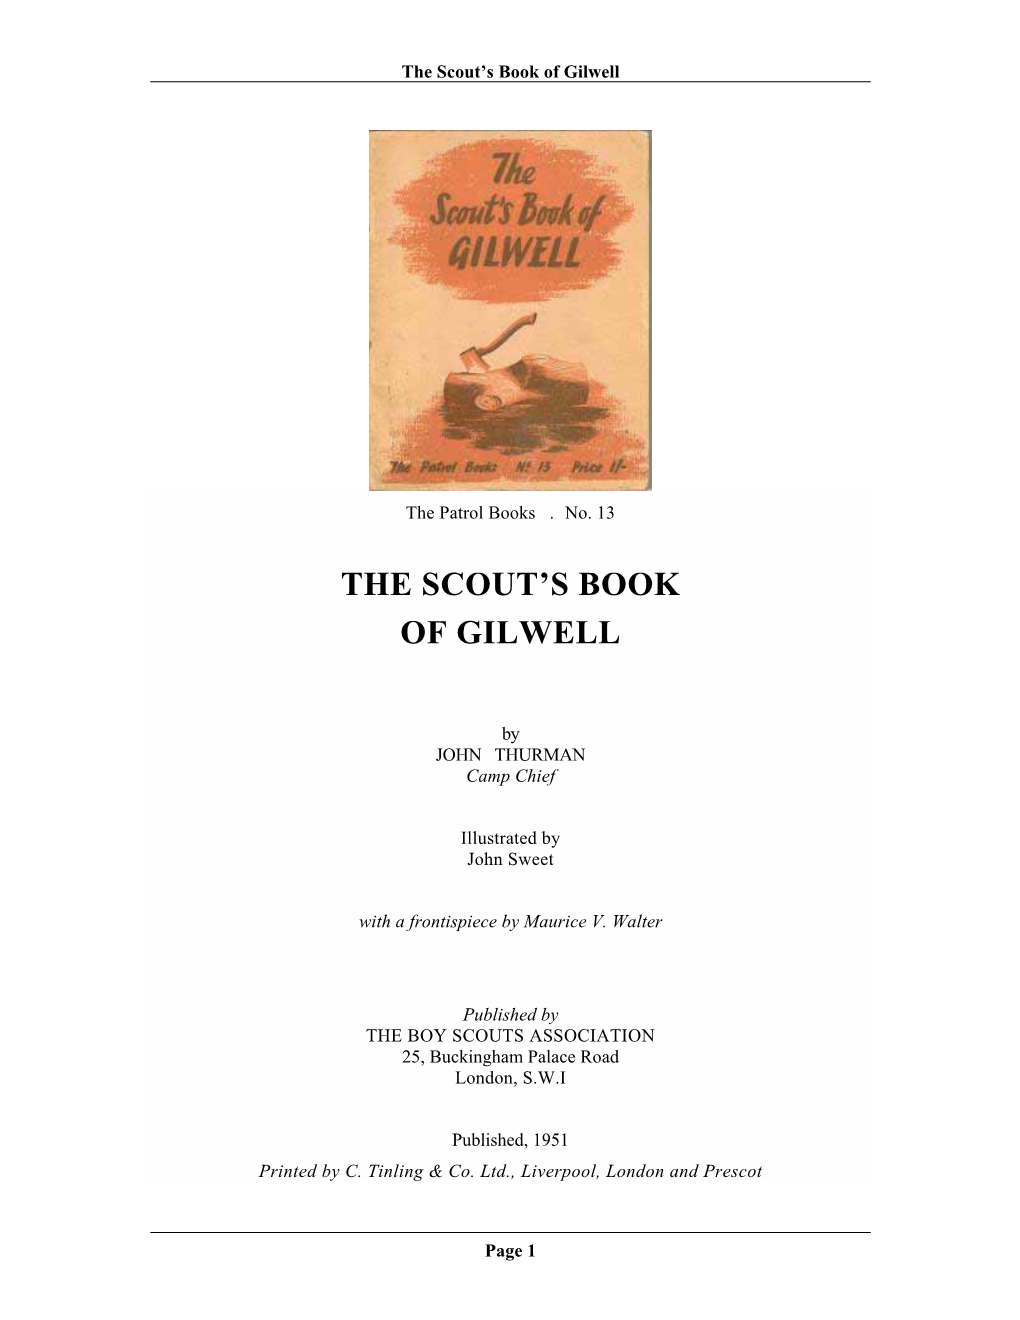 The Scout's Book of Gilwell